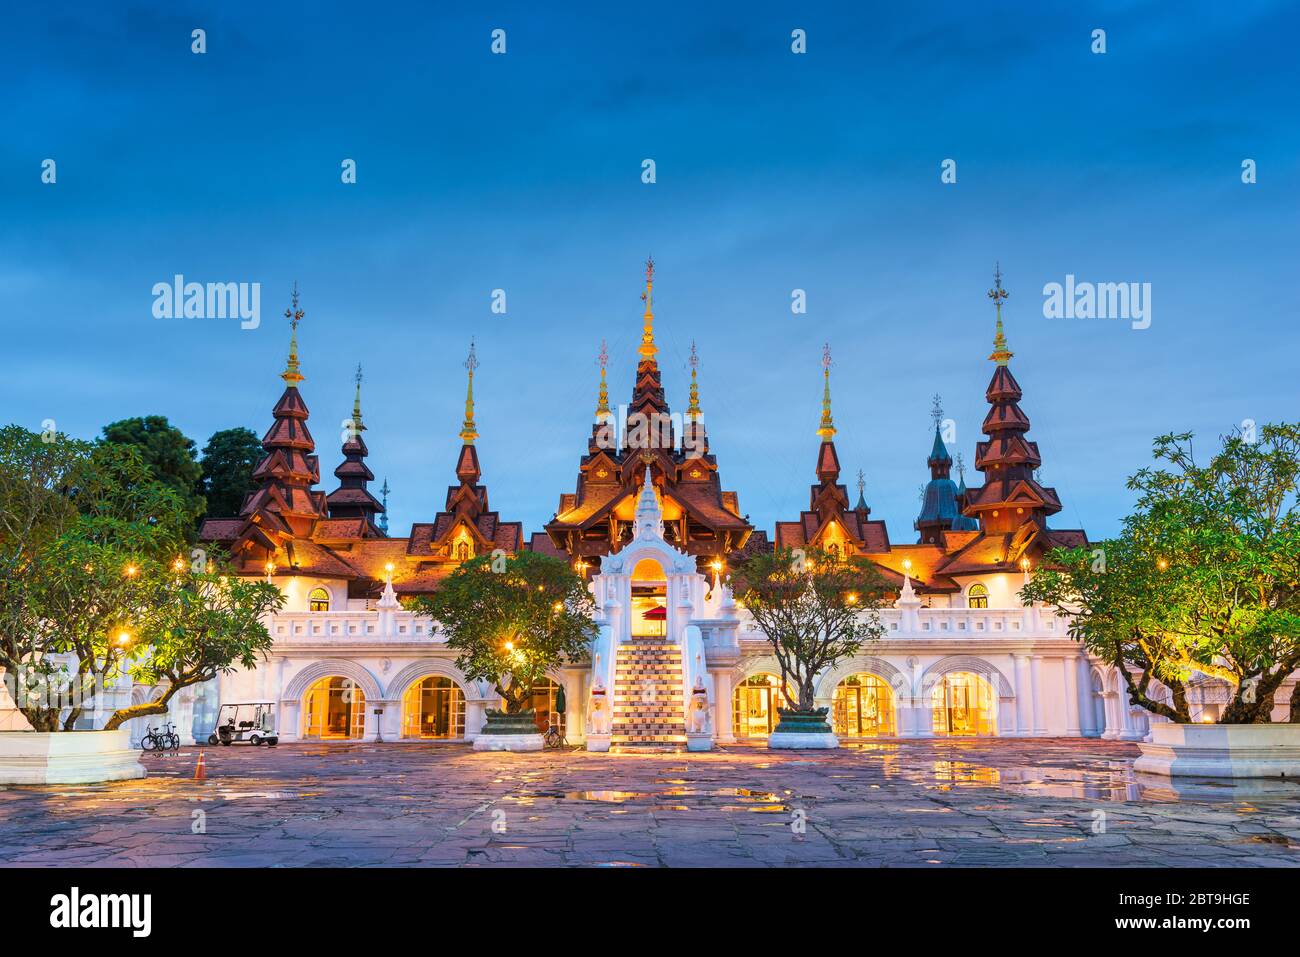 Chiang Mai, Thailand traditional architecture at dusk. Stock Photo